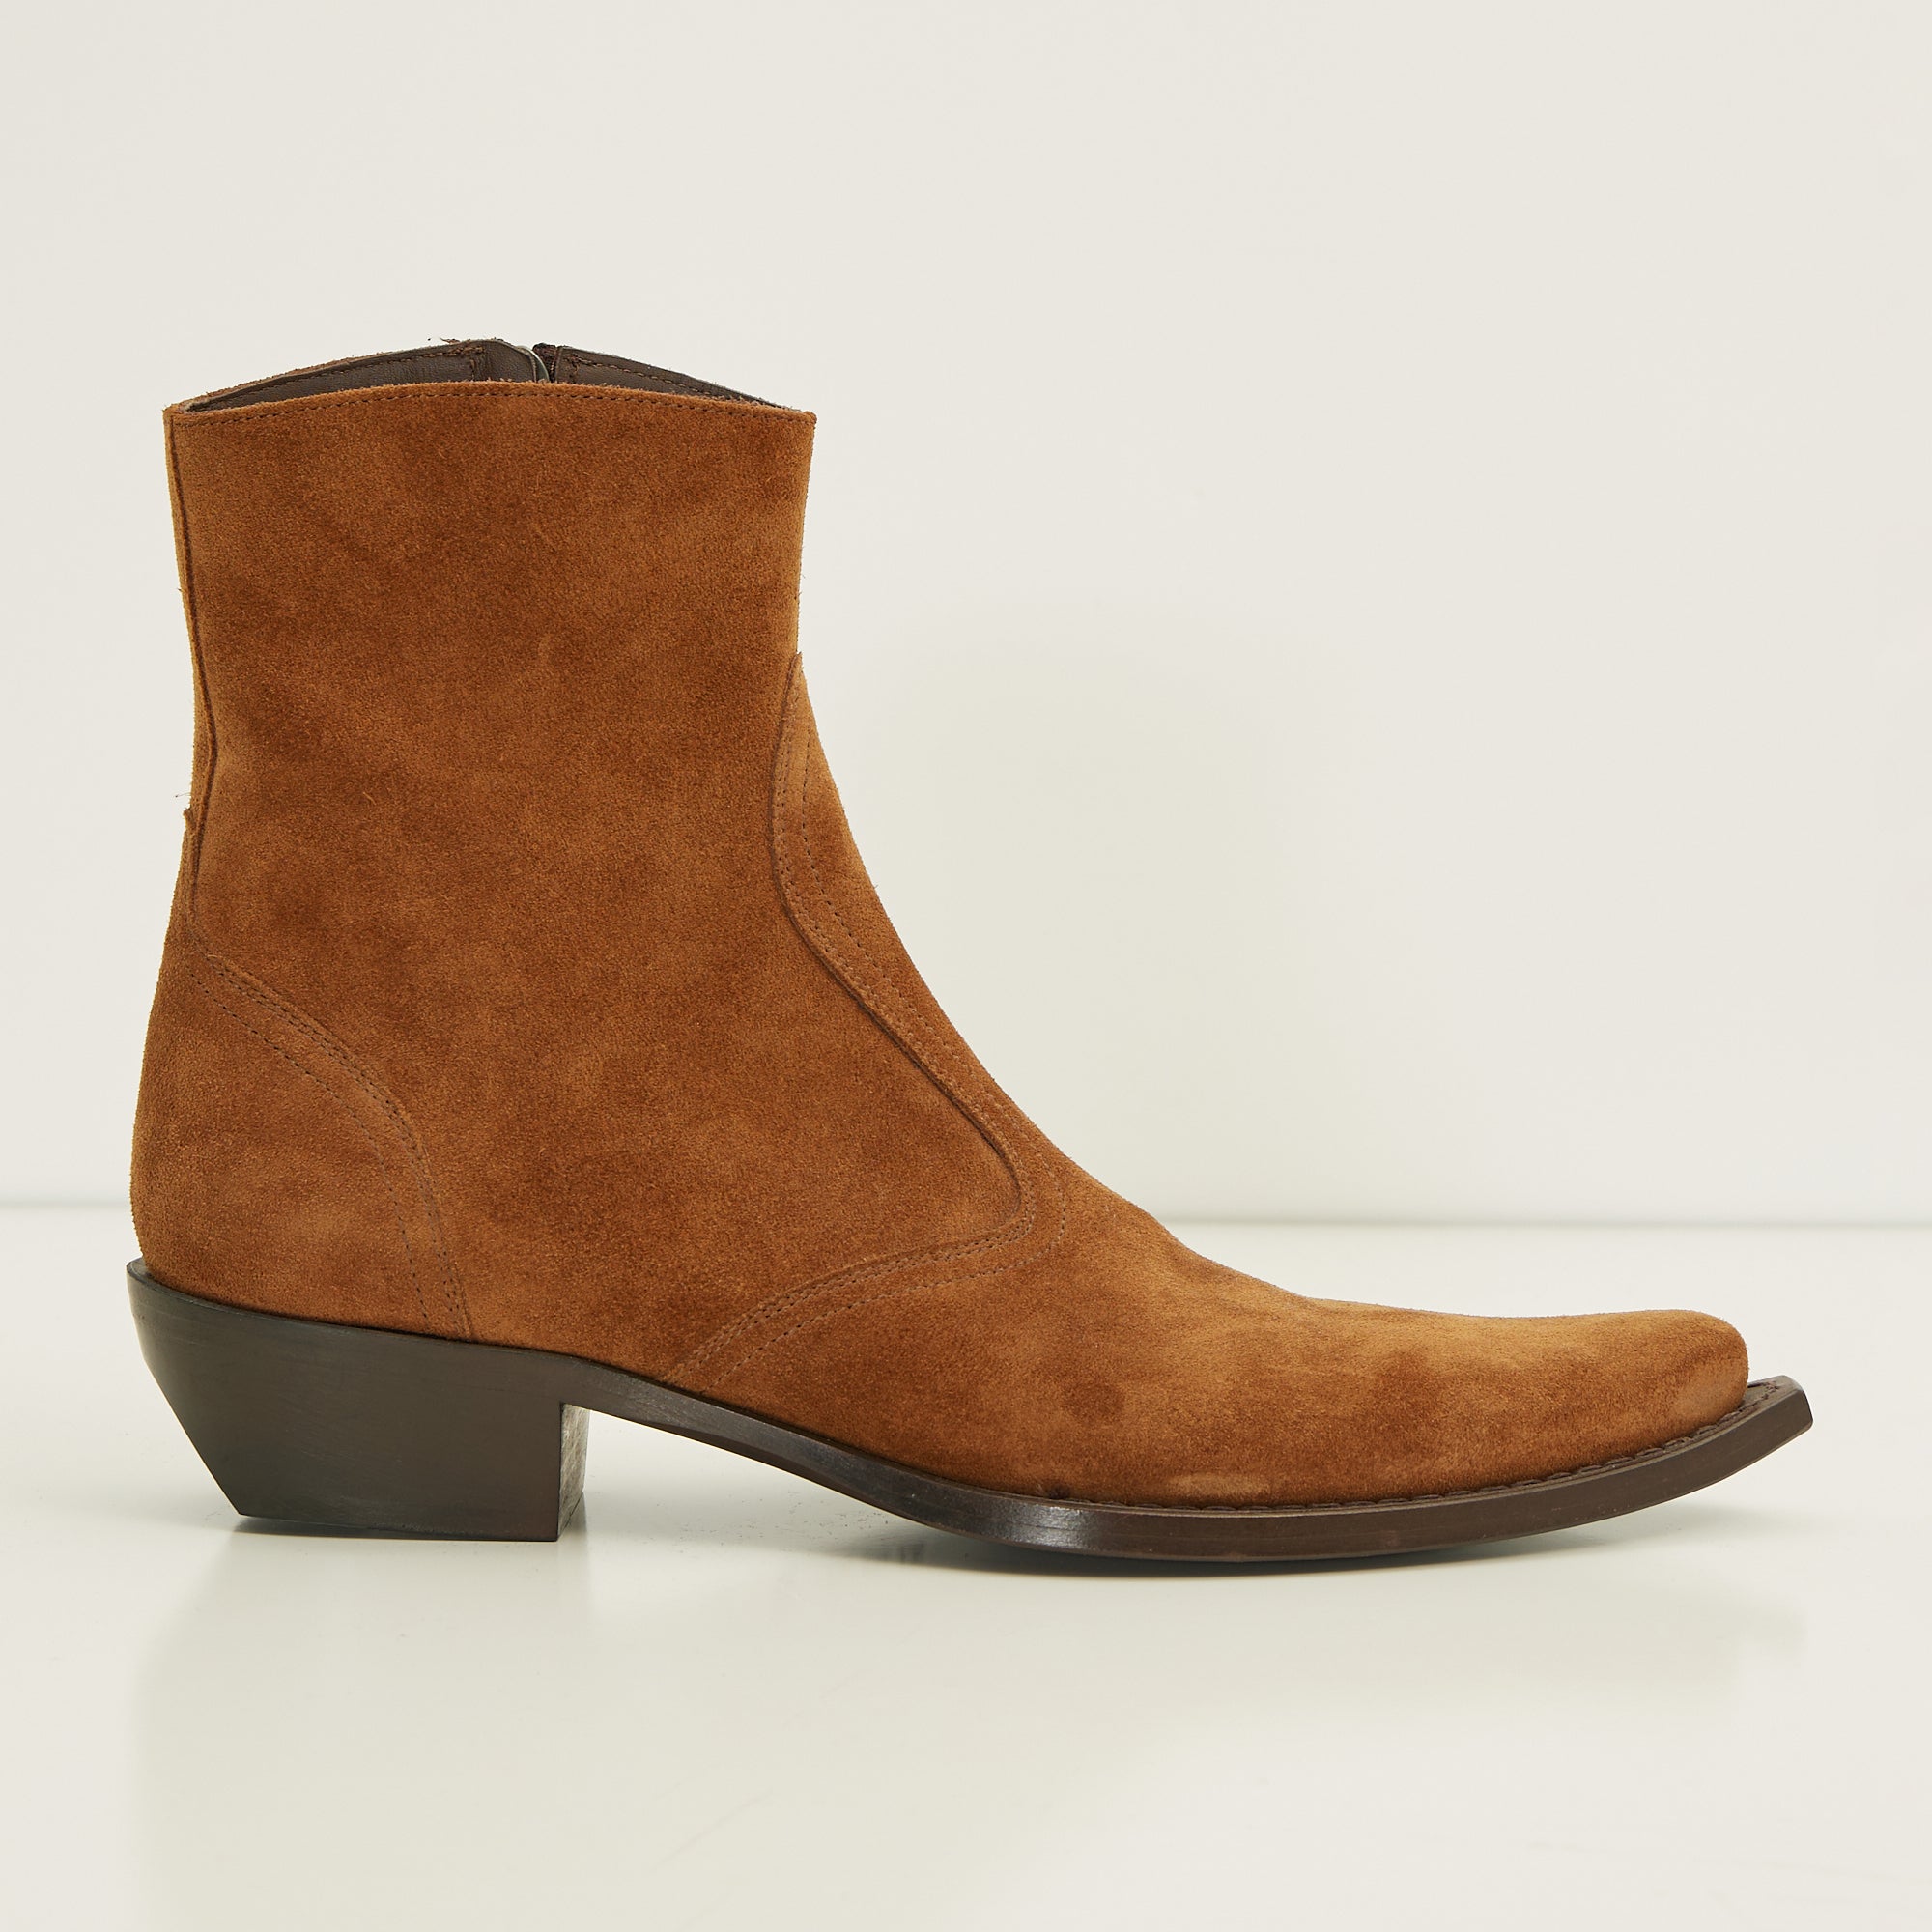 N° A2005.44 JONAH SIDE ZIP BOOT - TOBACCO SUEDE – Ron Tomson